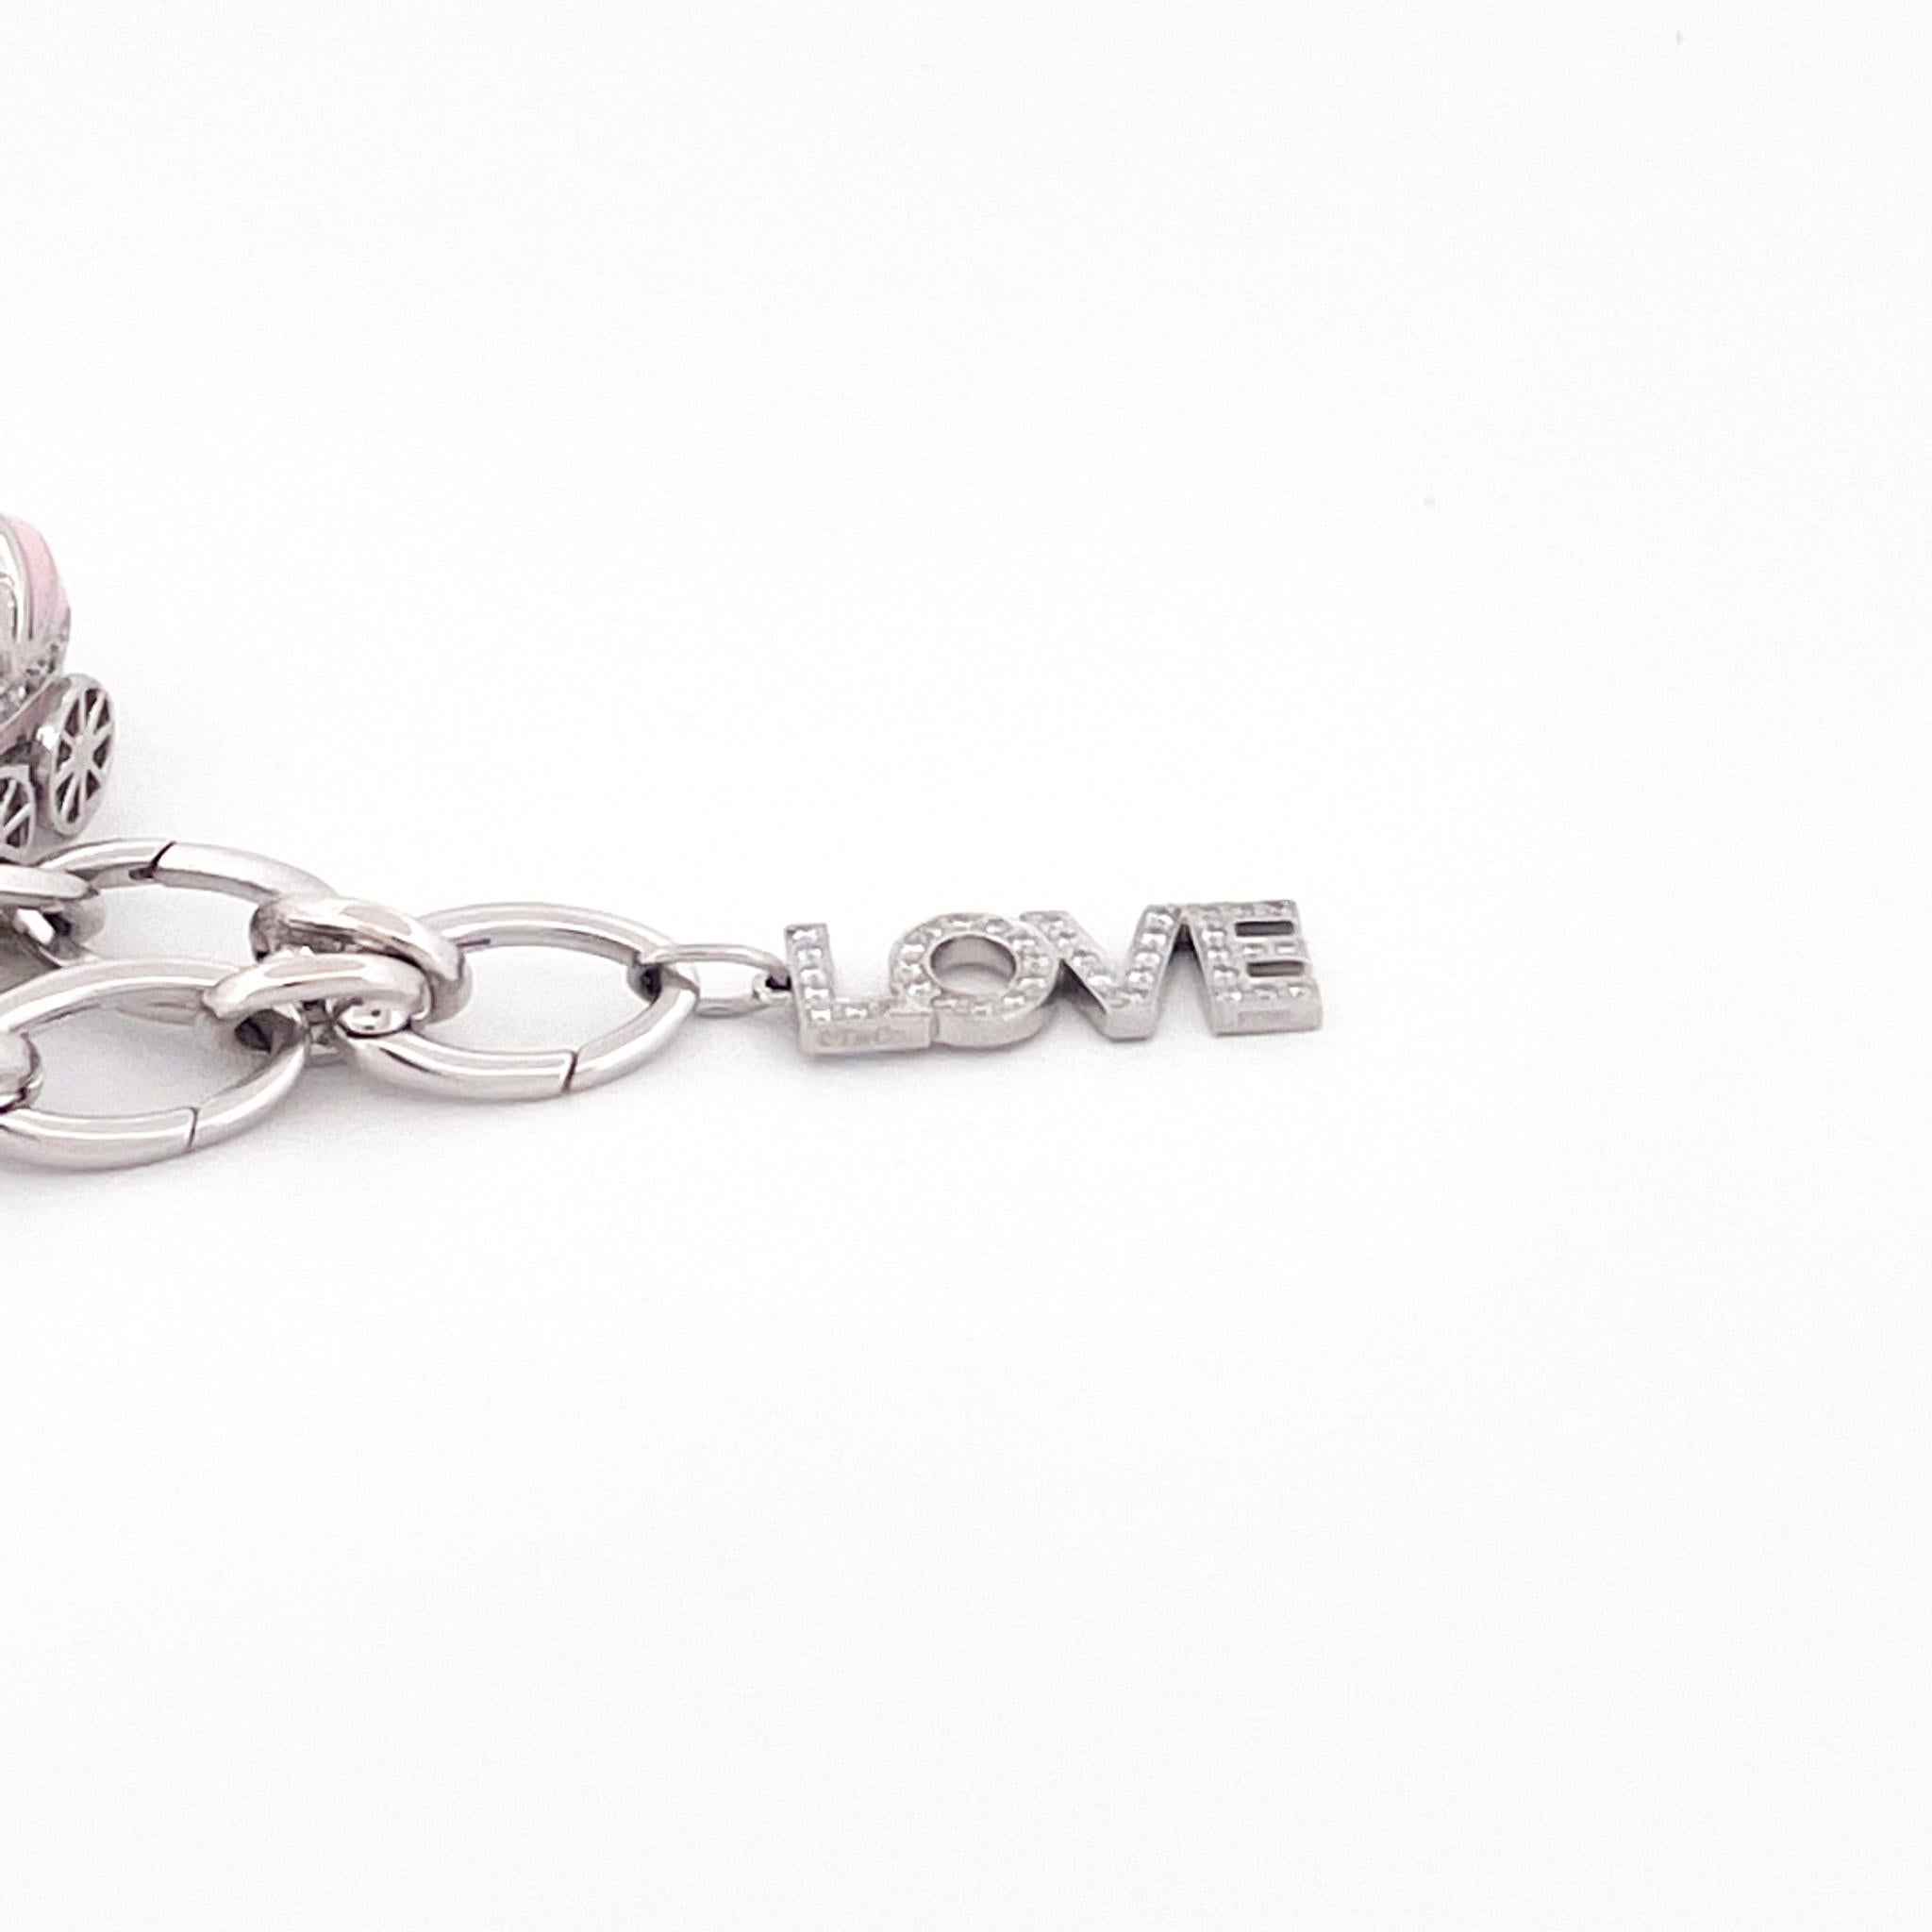 From designer Tiffany & Co., circa 2005, 18 karat white gold oval link charm bracelet. This bracelet is crafted with an assortment of charms including

1 platinum and pink enamel diamond baby carriage charm crafted with 23 round cut diamonds with a